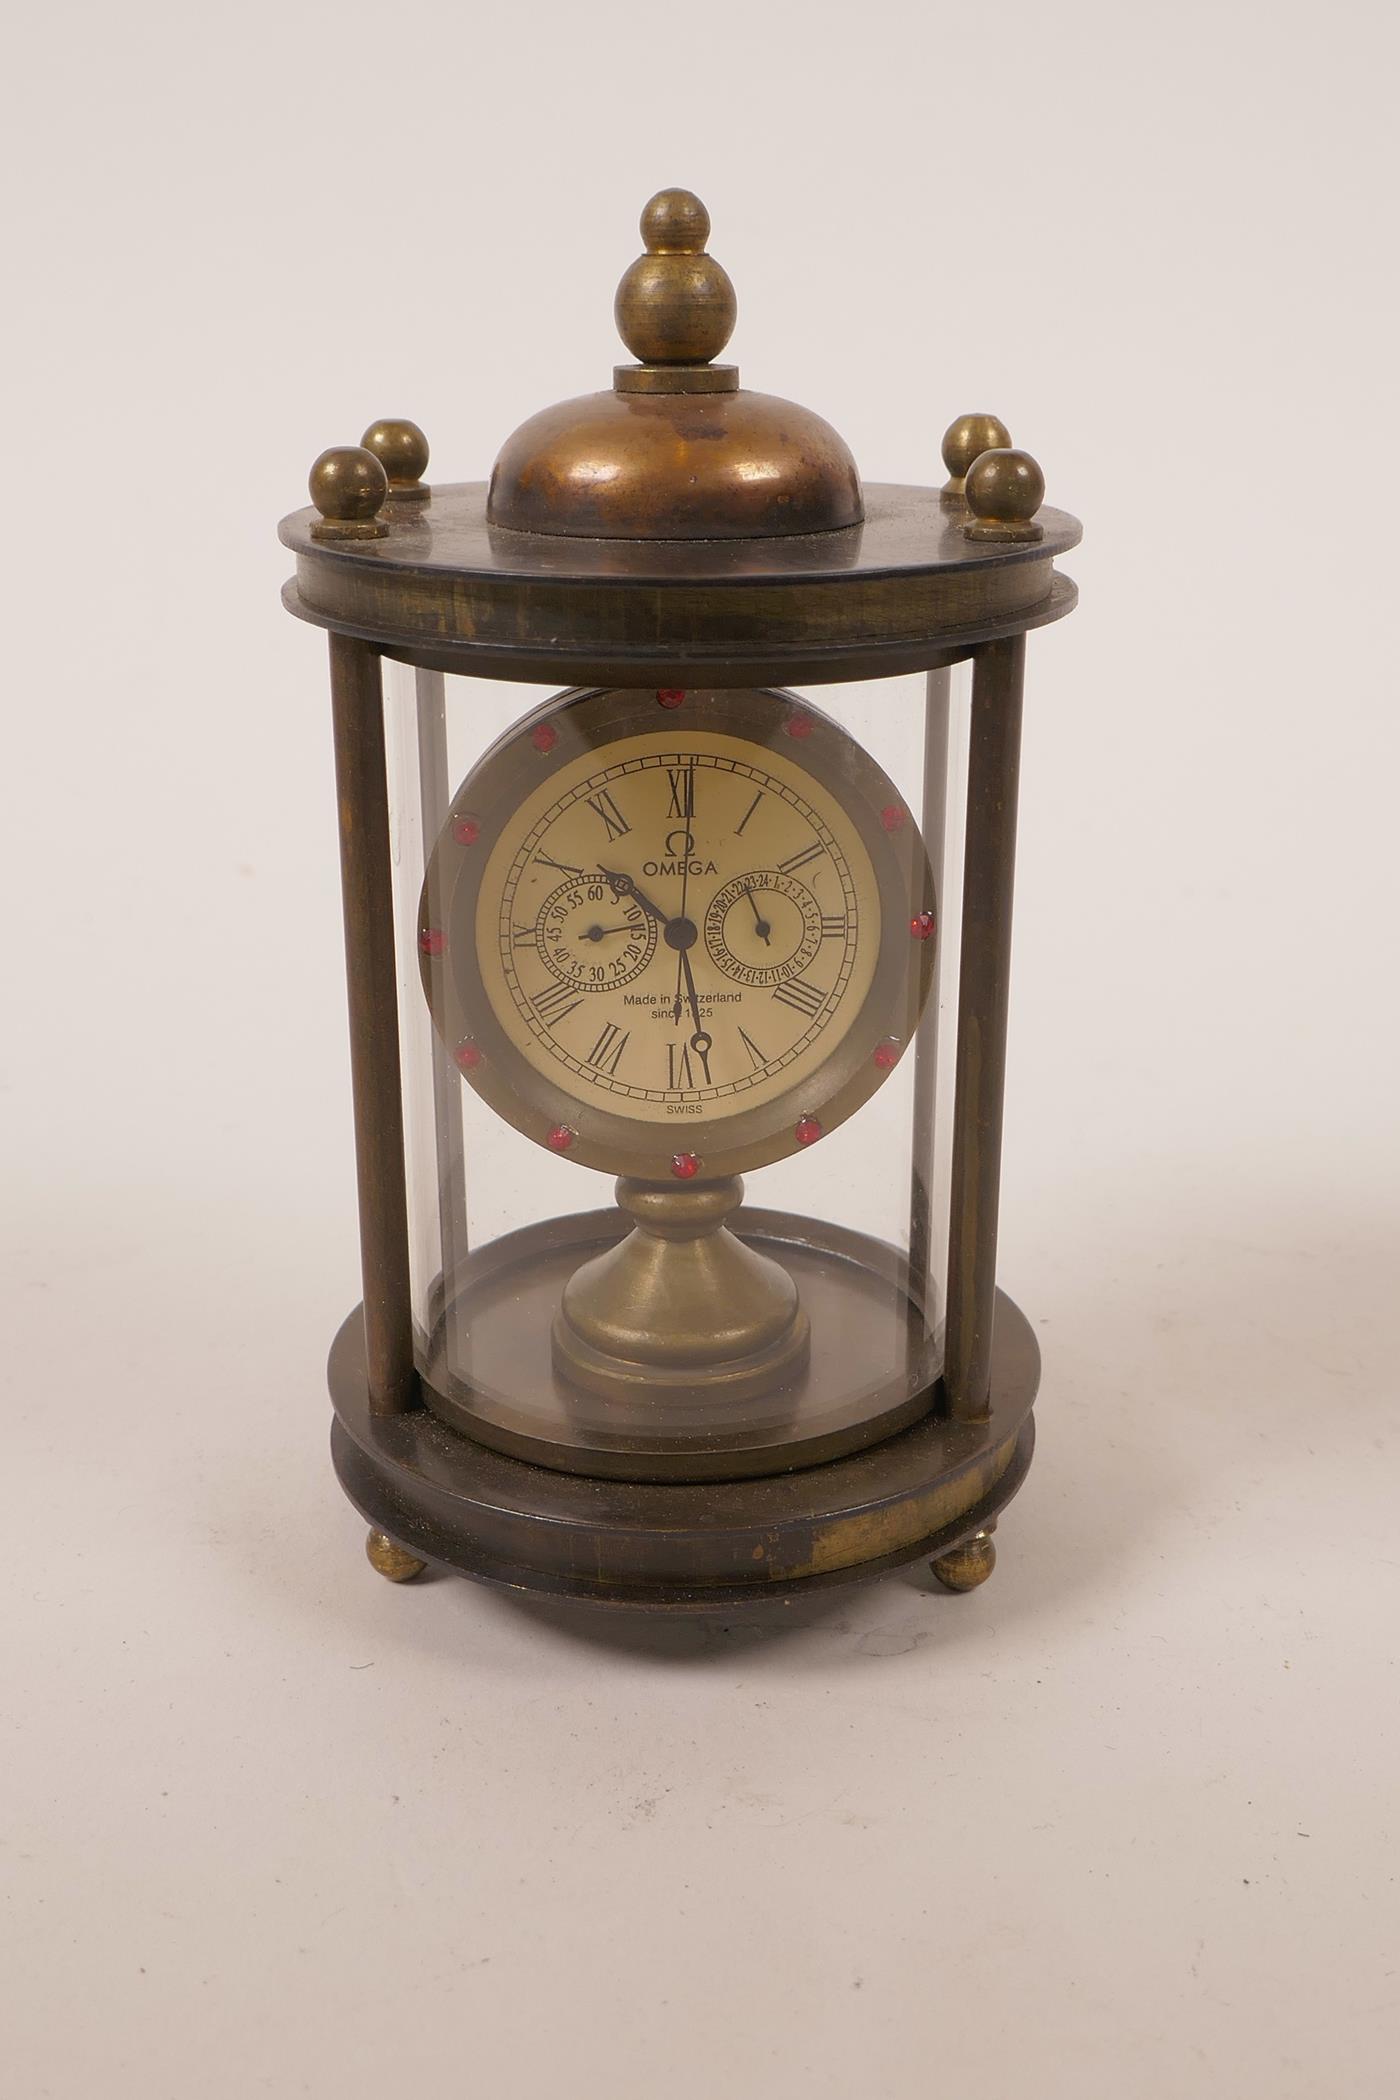 A bronze metal cased desk clock with an open movement, 4½" high